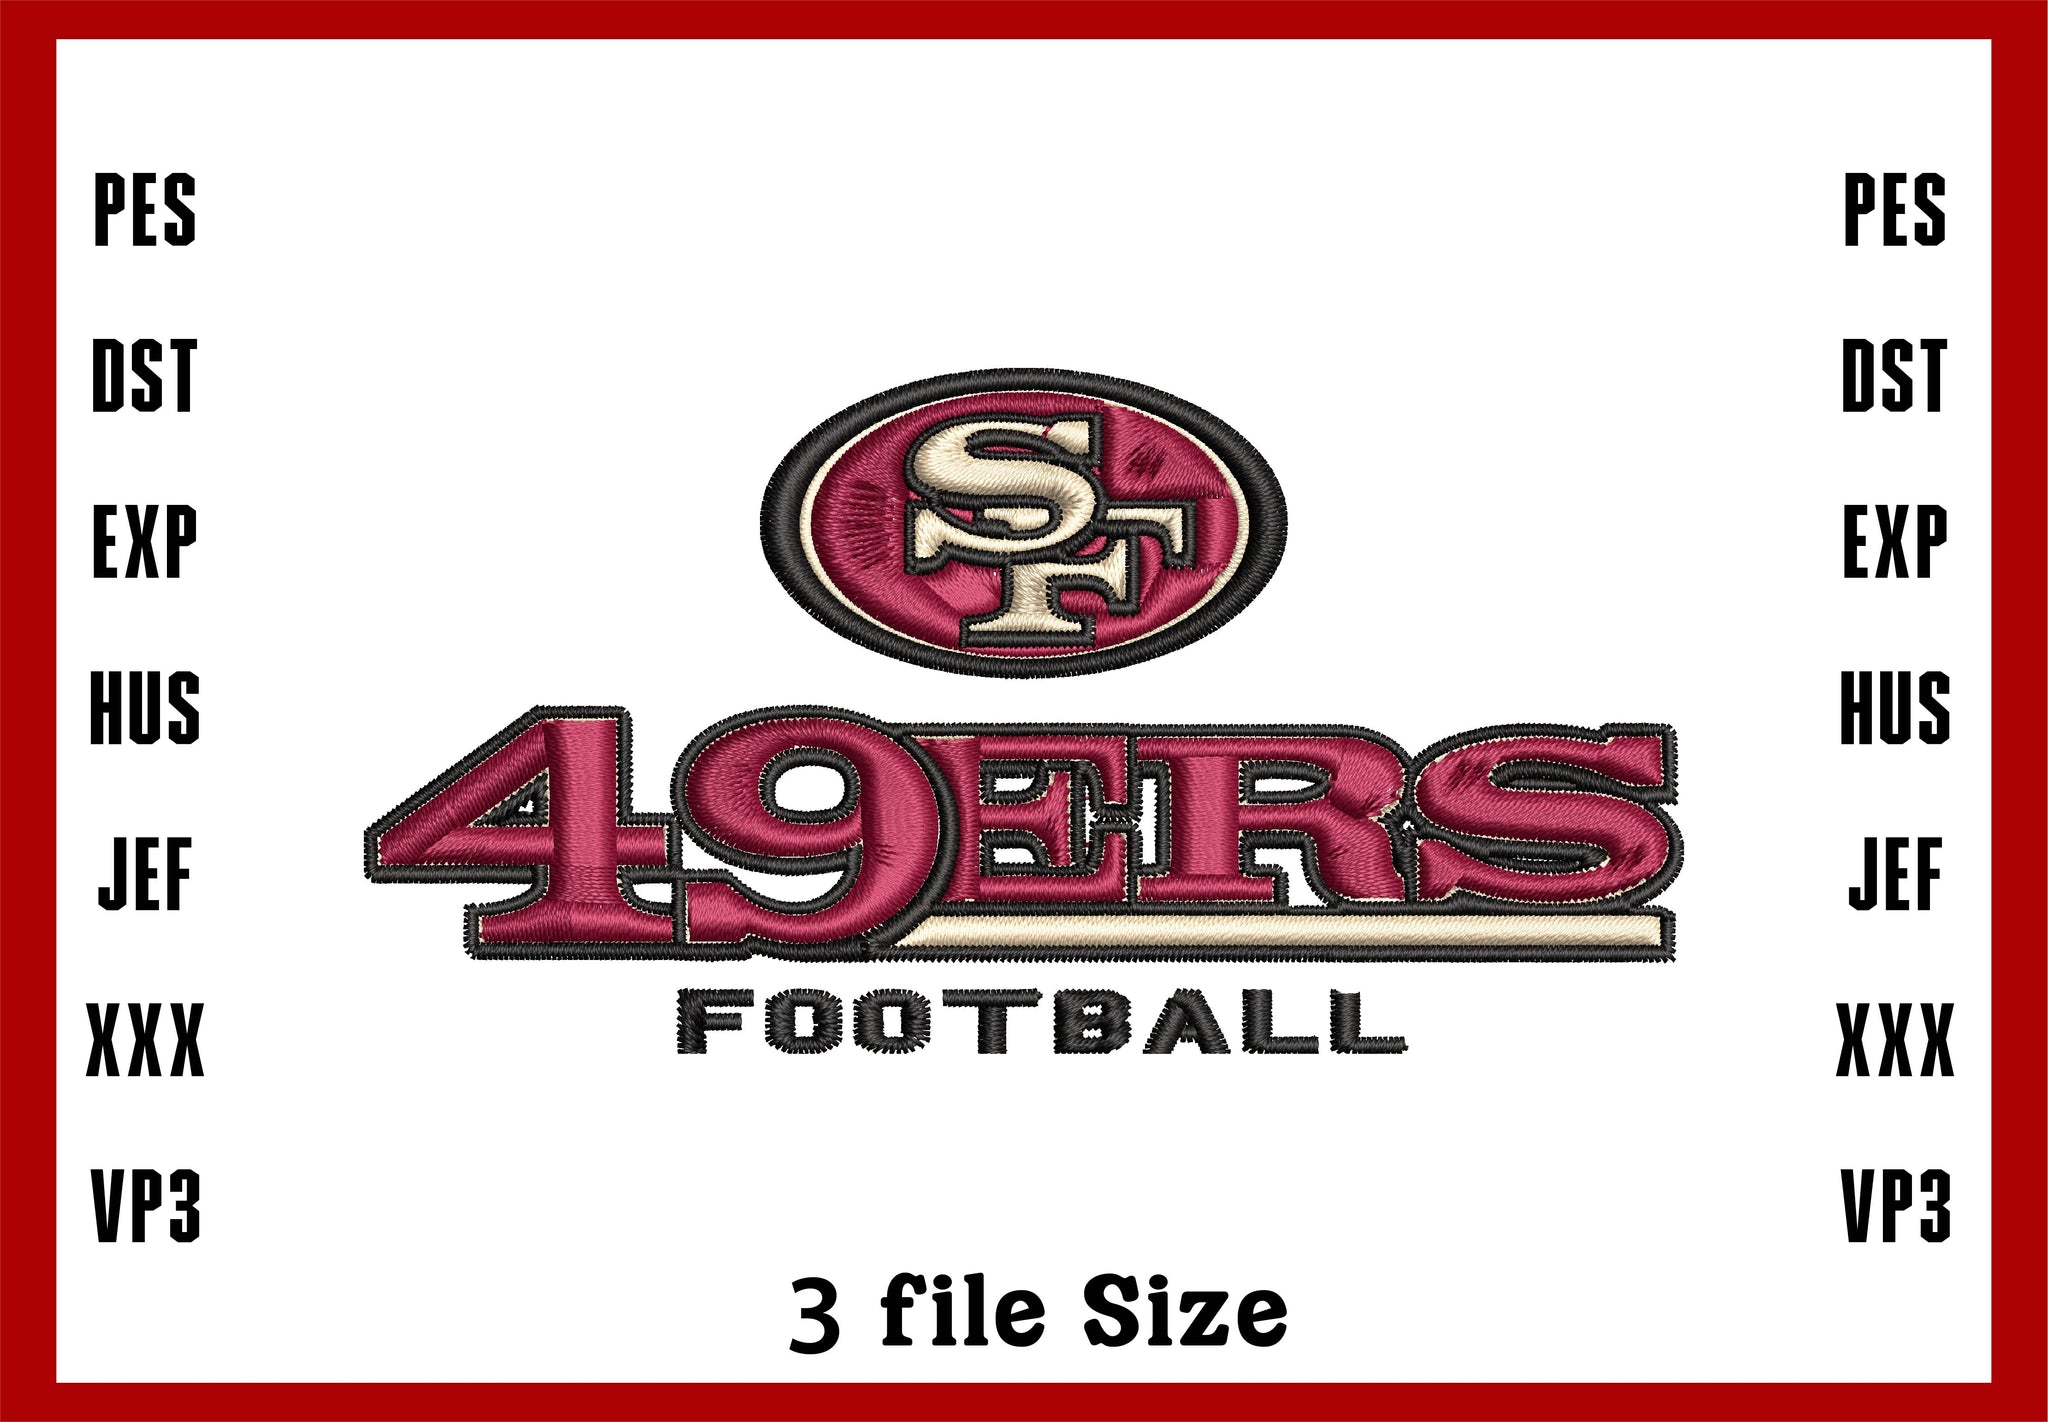 San Francisco 49ers logo embroidery design, Machine Embroidery Design, 4 File sizes- Instant Download & PDF File